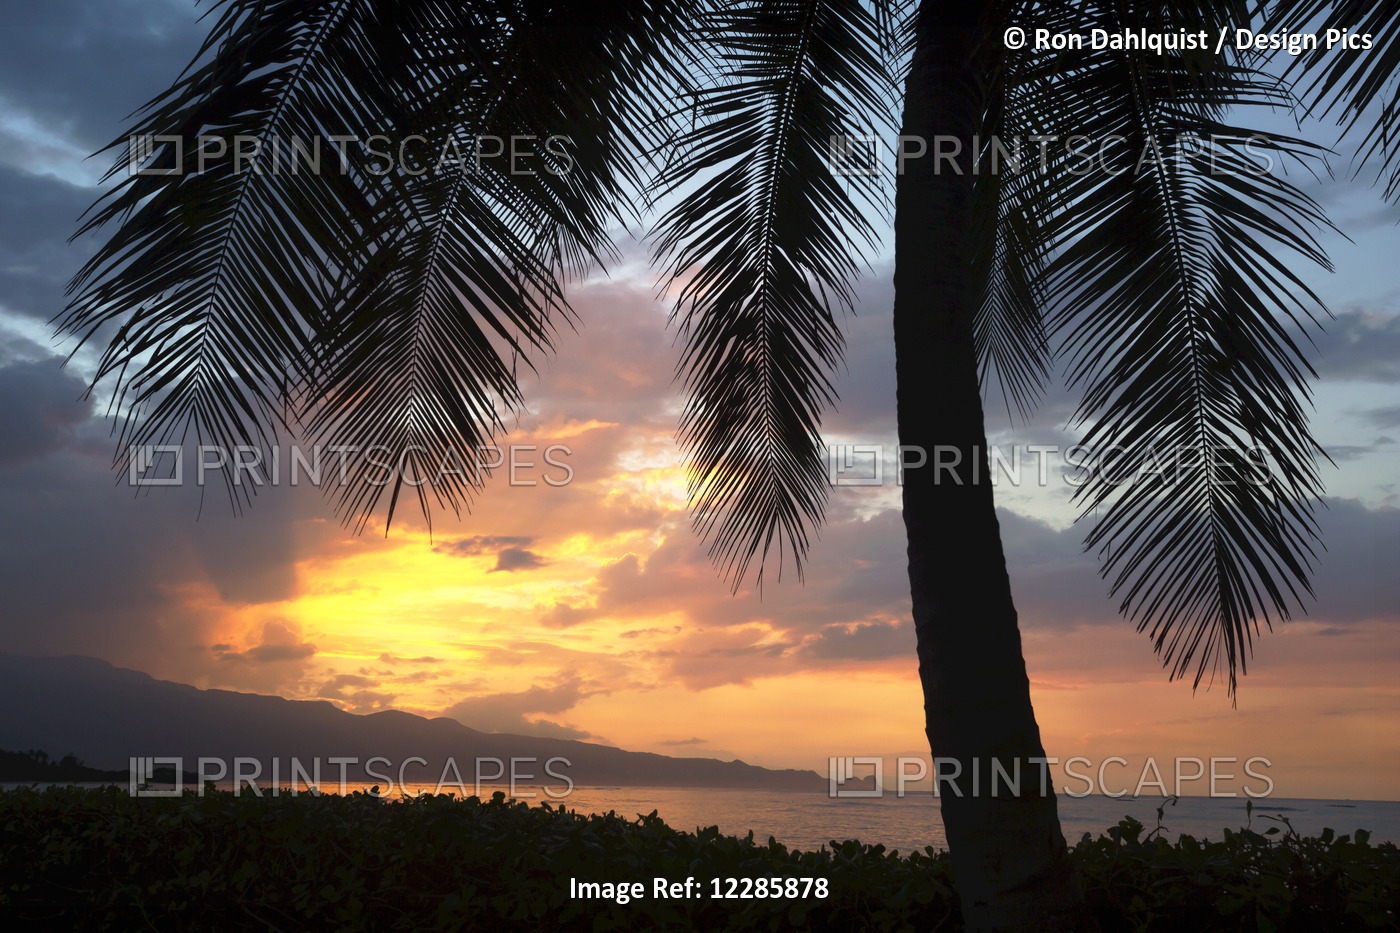 Sunset On The North Shore Of Maui; Spreckelsville, Maui, Hawaii, United States ...